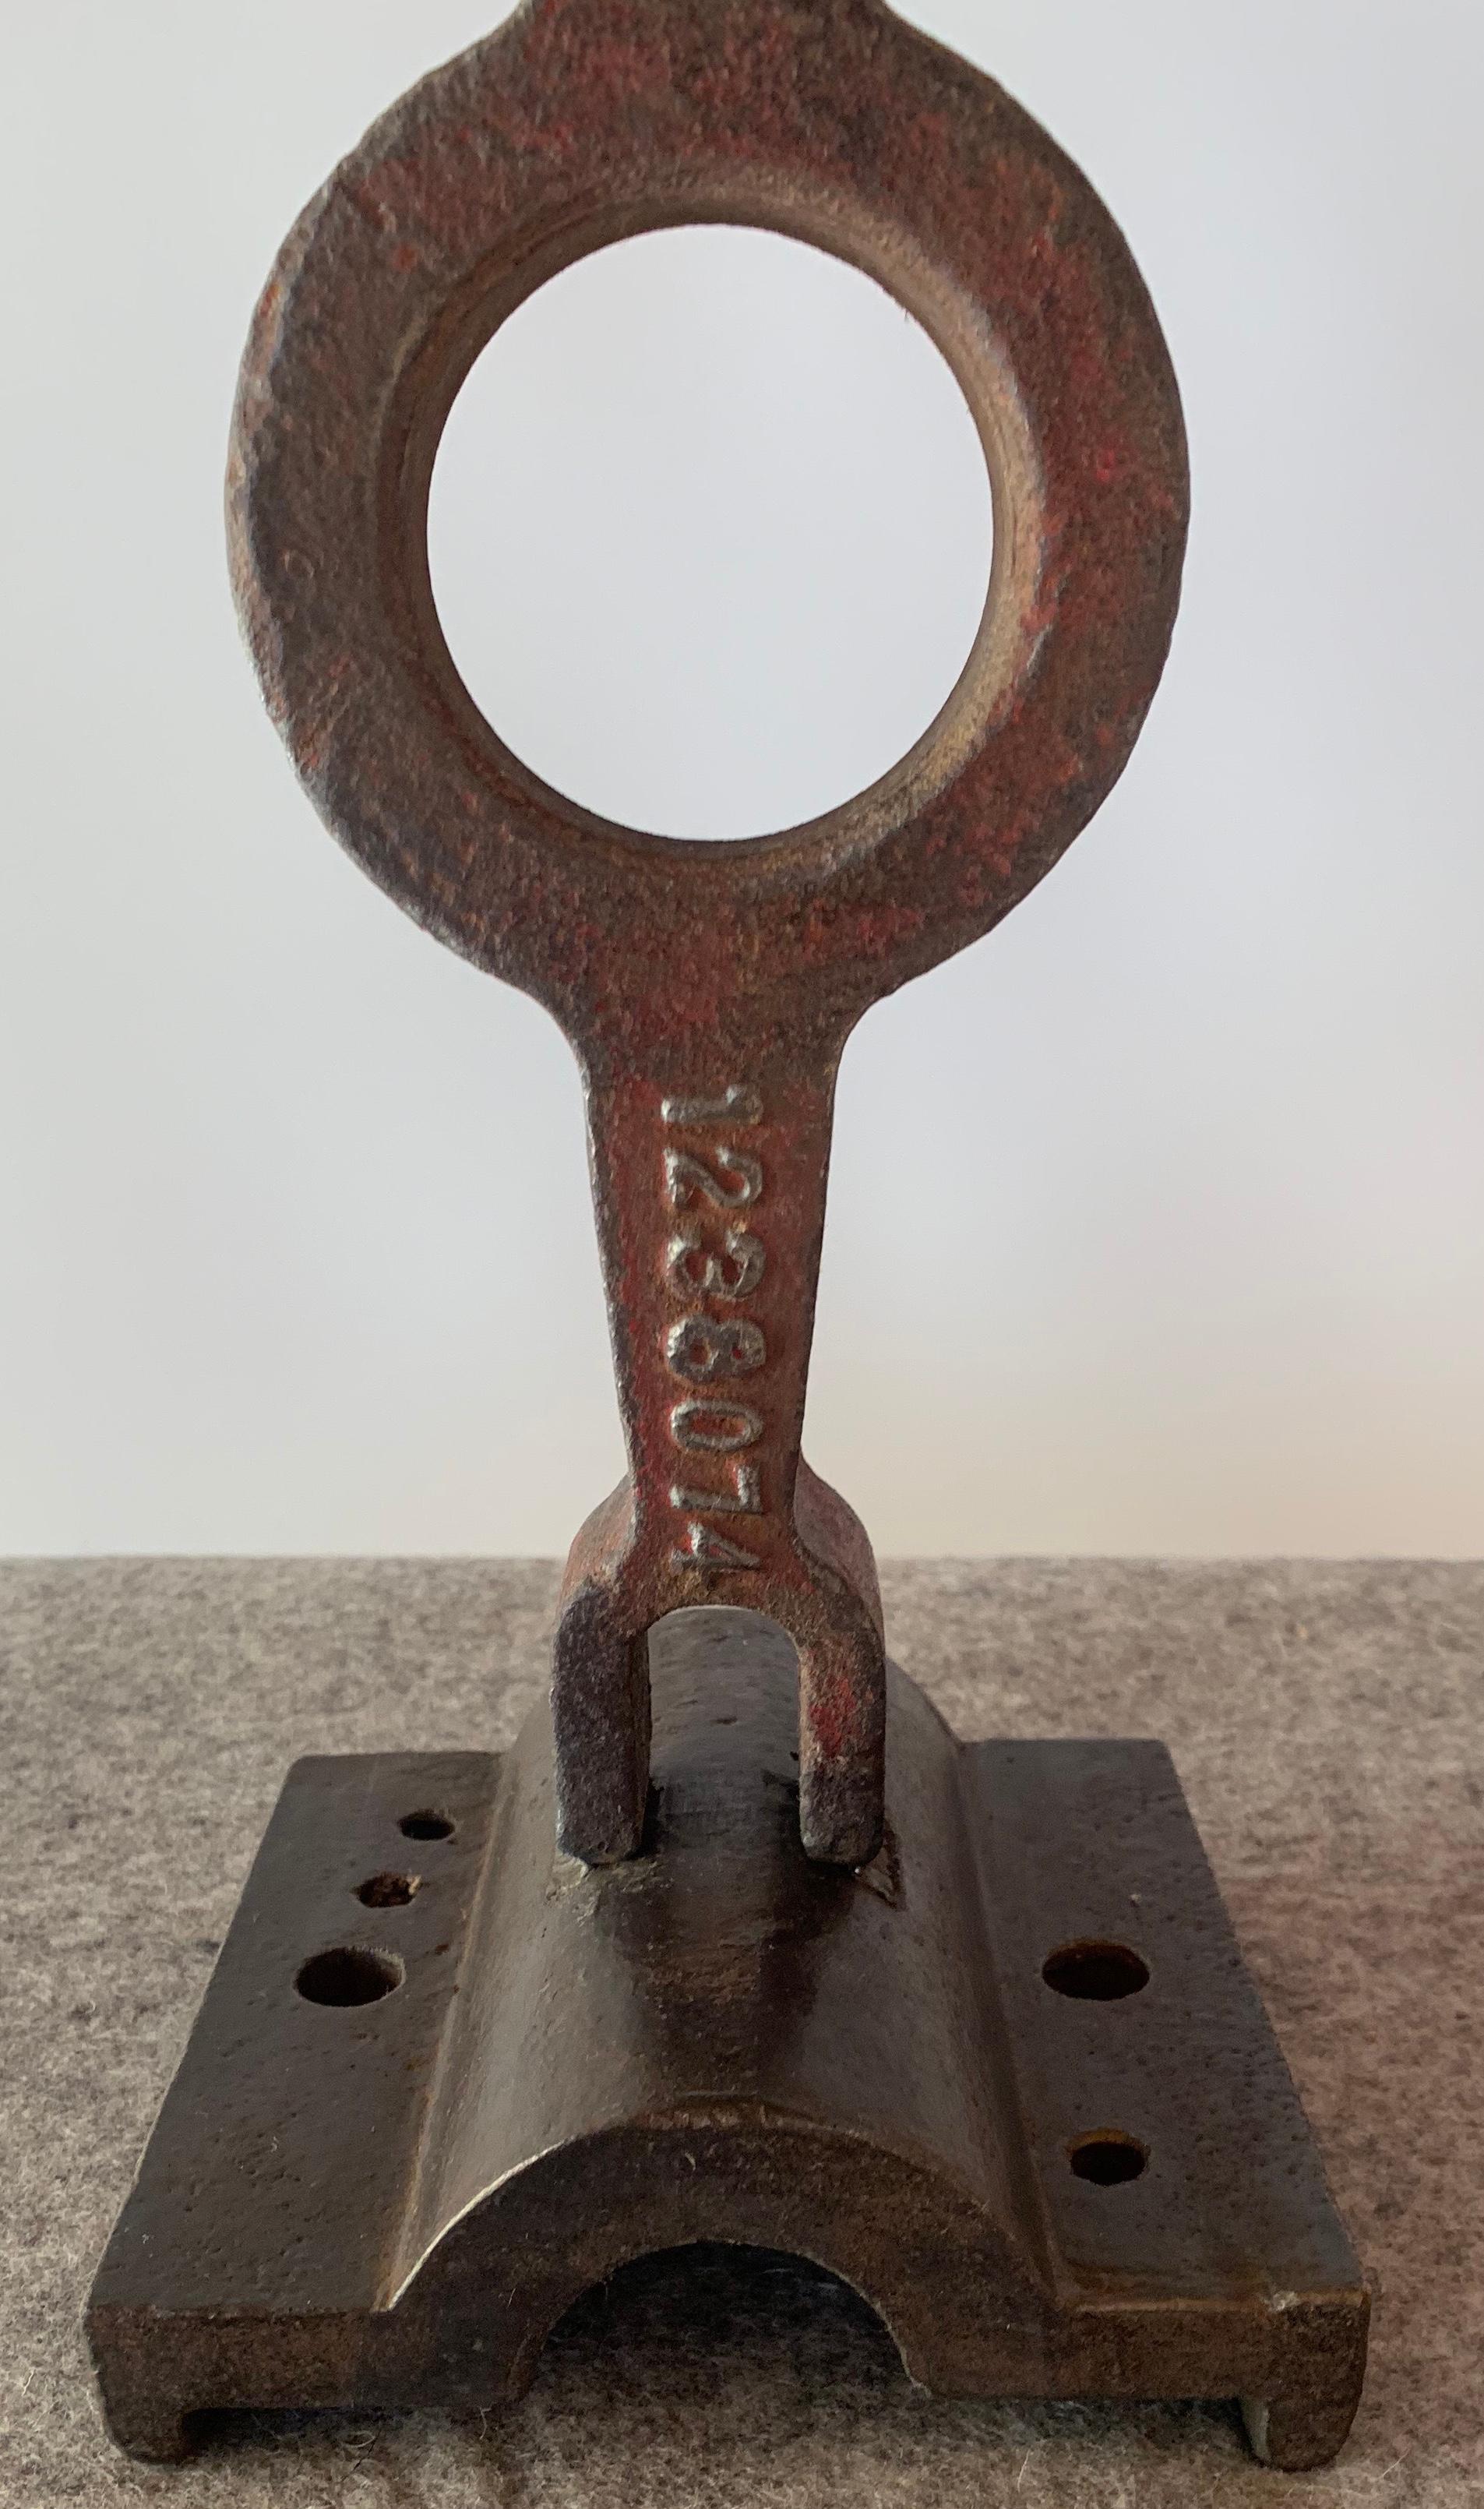 Woman
welded steel
Measures: 5 x 5 x 13 in.

Artist statement:

I seldom use stock material, but prefer distressed and rusted steel that has been scarred, bent, and made imperfect. In this state, the material becomes quite beautiful. There are